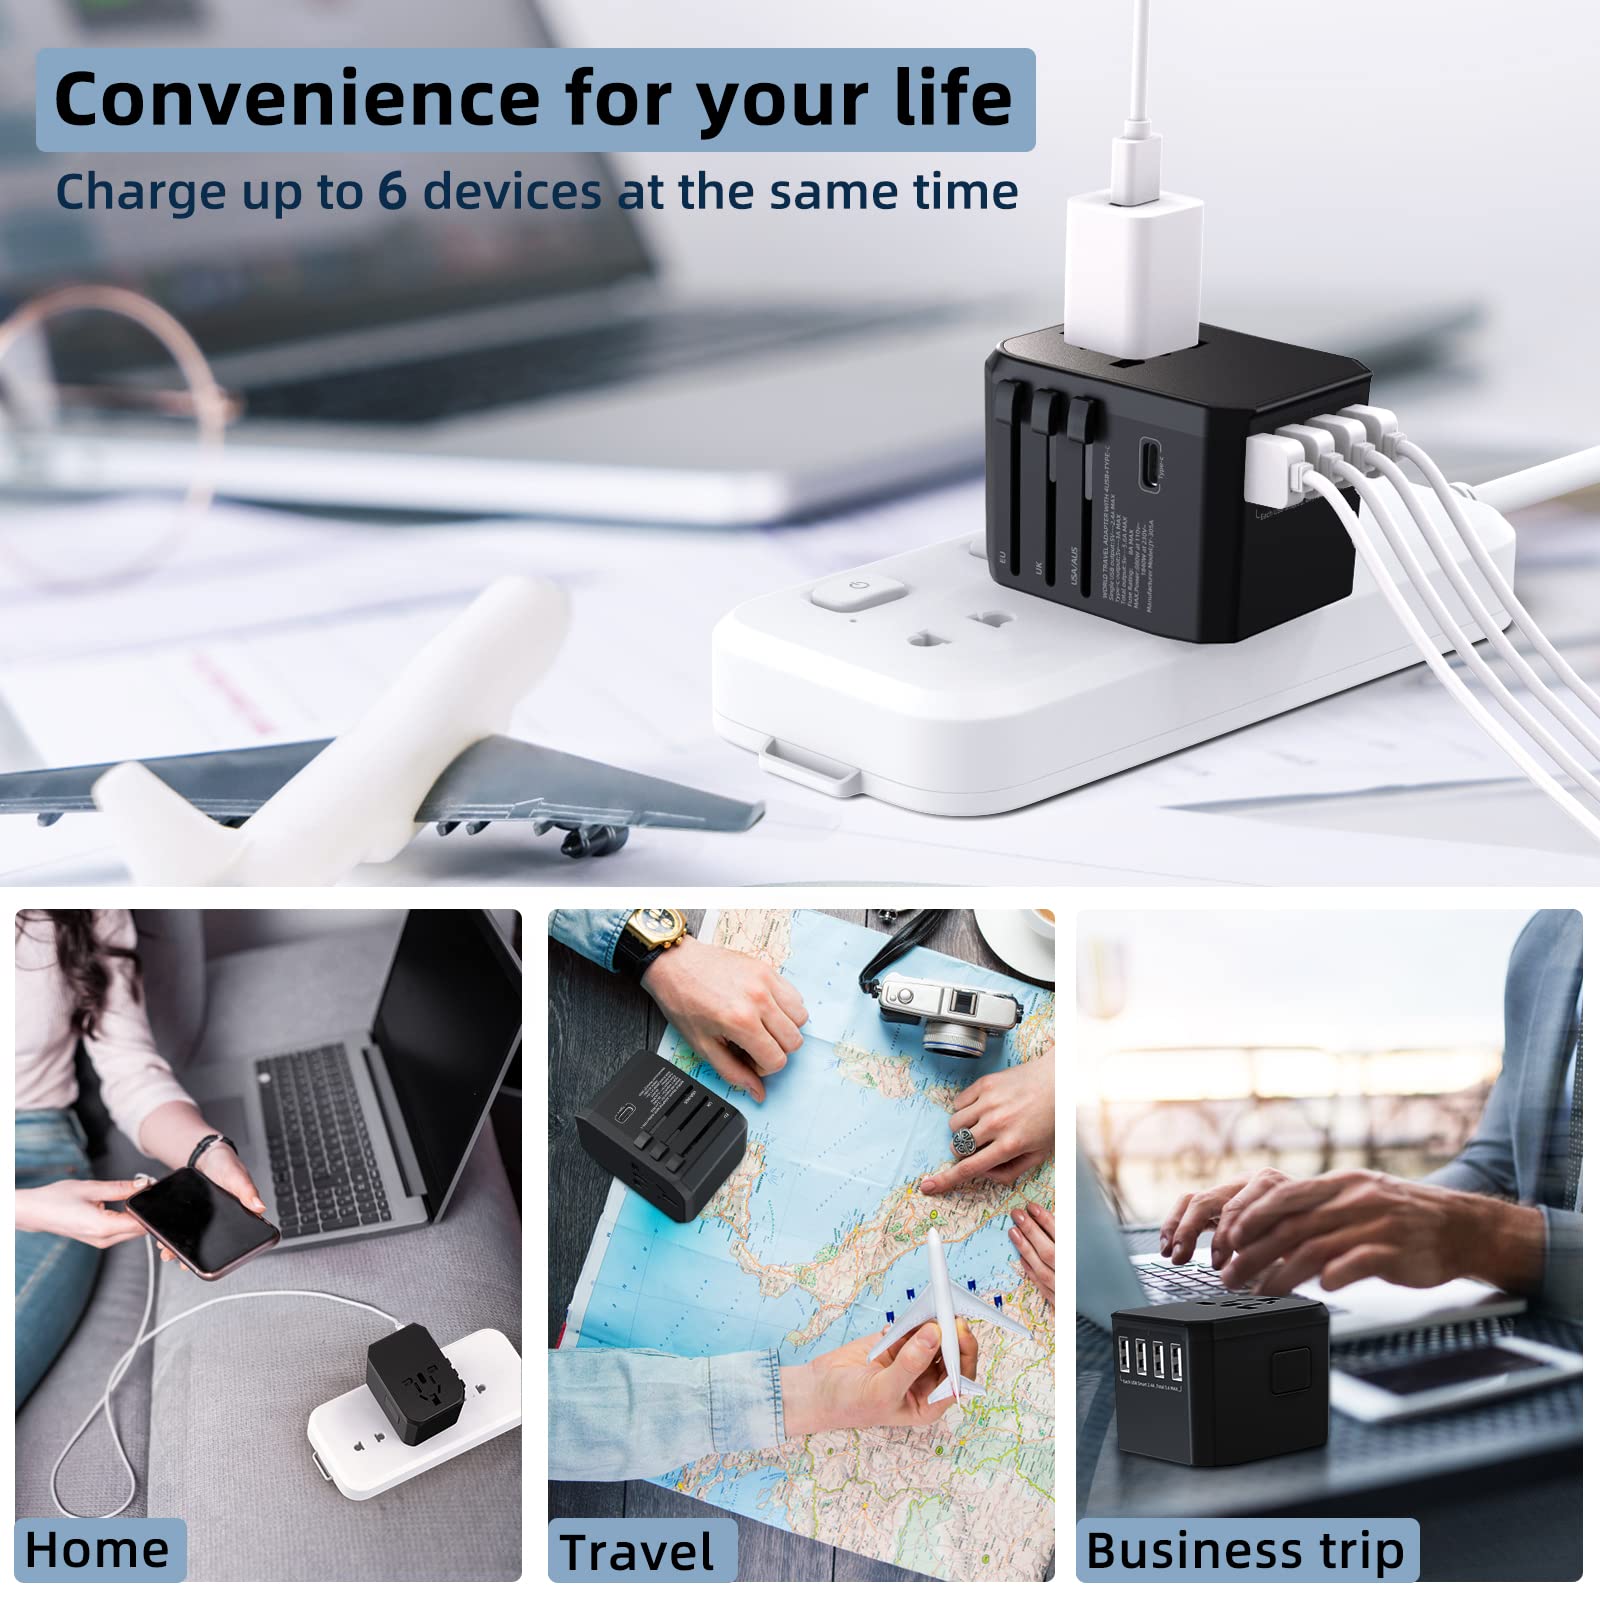 Travel Plug Universal Travel Adapter, International Plug Power Adapter with 5.6A Smart Multi USB + 3.0A Type-C + Universal AC Socket, Worldwide All-In-One Travel Adapter for 180+ Countries(Black)